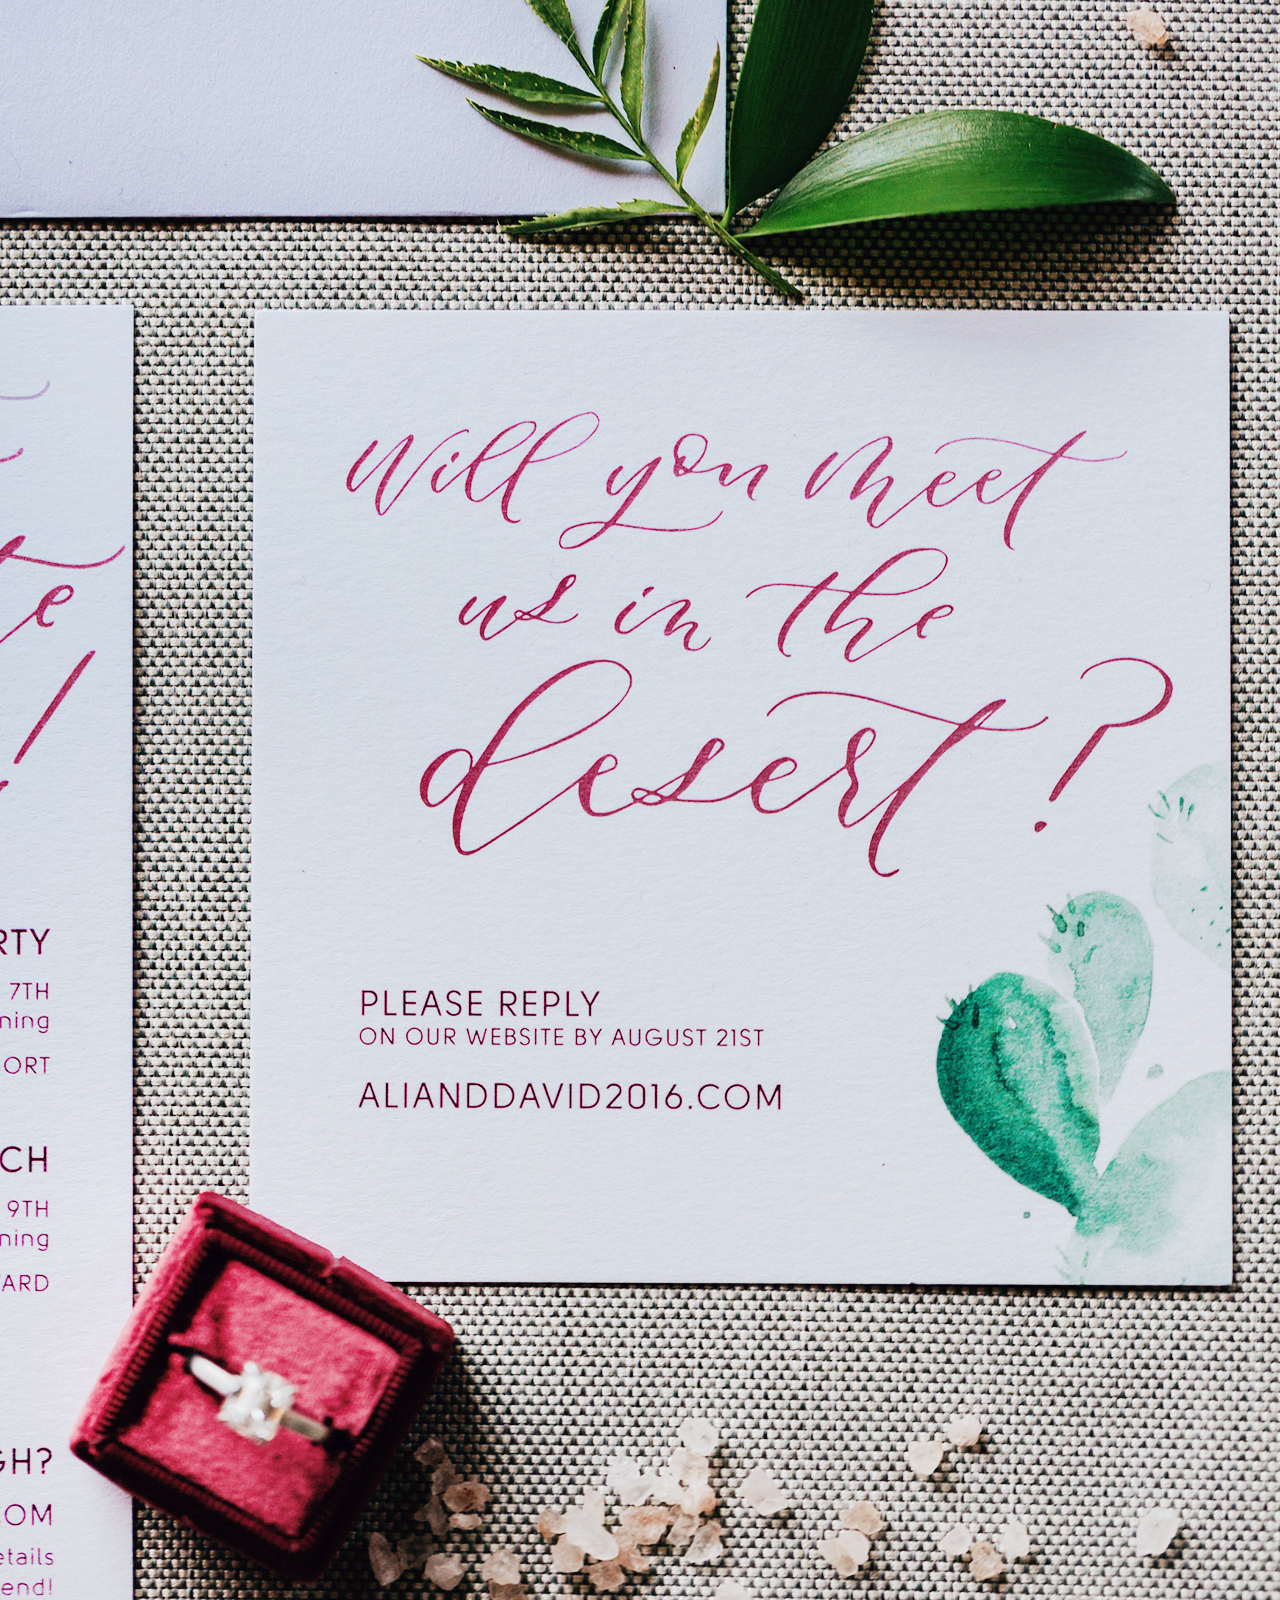 Cactus and Calligraphy Wedding Invitations by Twinkle and Toast